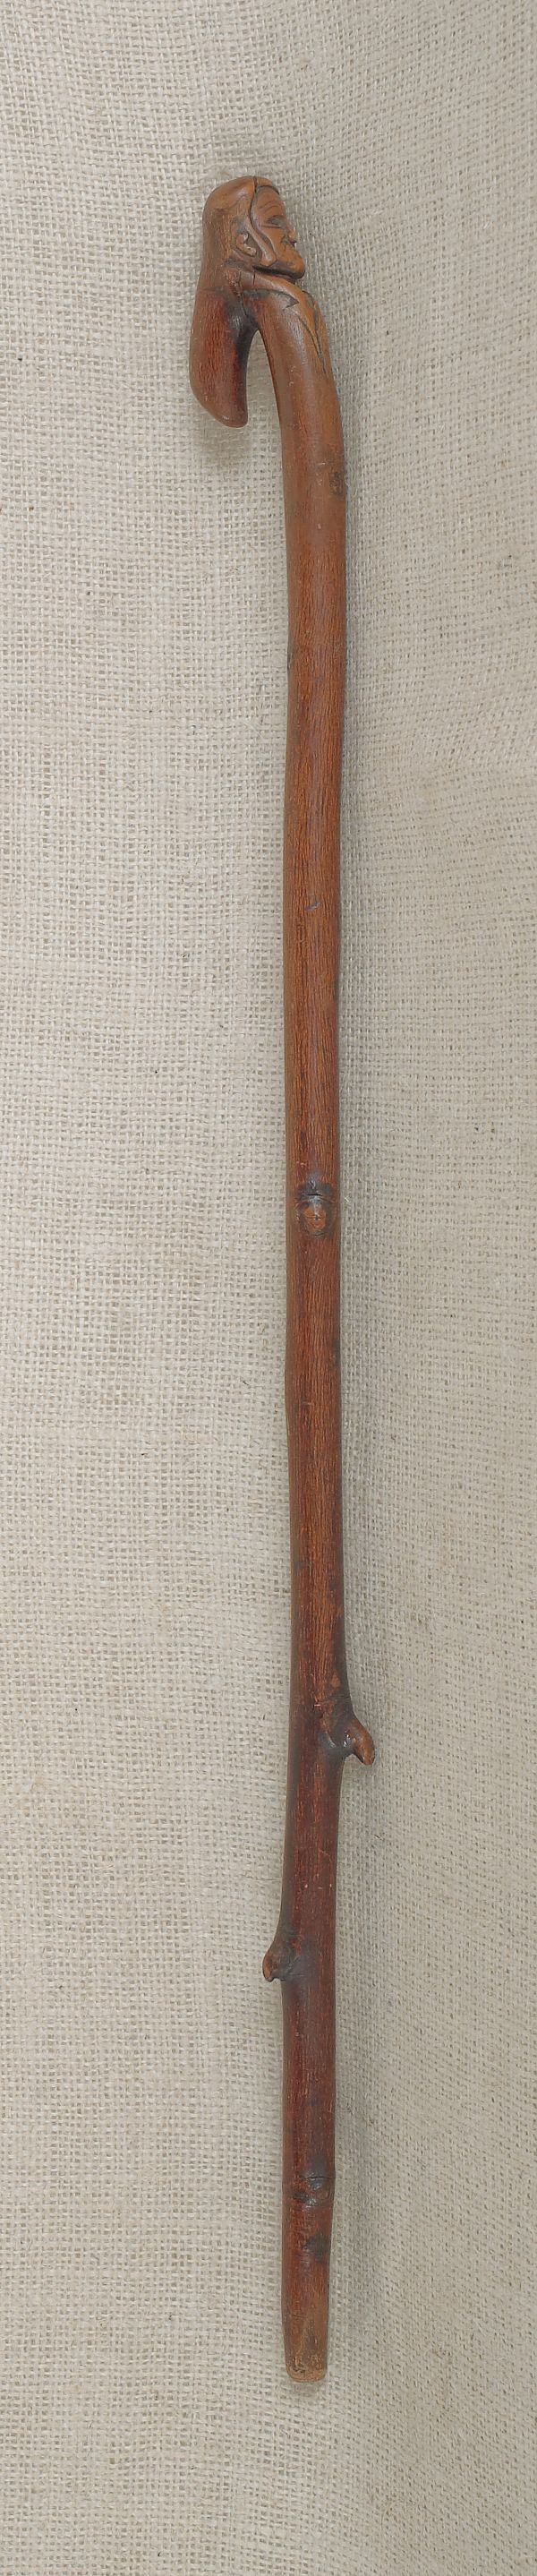 Carved cane late 19th c. the grip